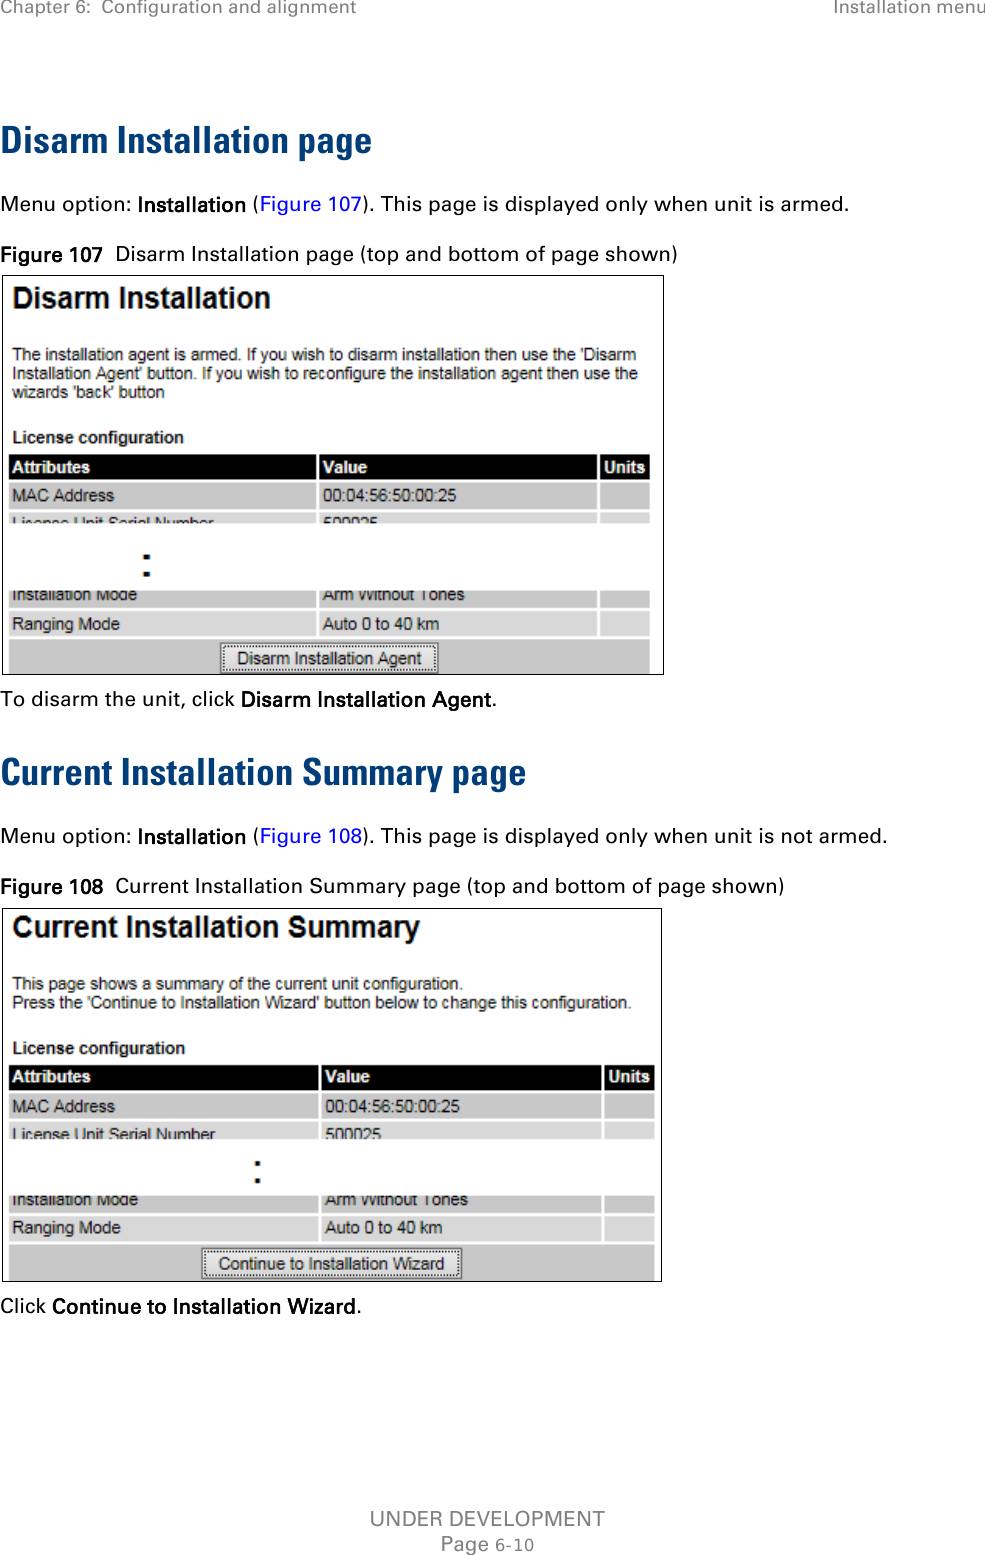 Chapter 6:  Configuration and alignment Installation menu  Disarm Installation page Menu option: Installation (Figure 107). This page is displayed only when unit is armed. Figure 107  Disarm Installation page (top and bottom of page shown)  To disarm the unit, click Disarm Installation Agent. Current Installation Summary page Menu option: Installation (Figure 108). This page is displayed only when unit is not armed.  Figure 108  Current Installation Summary page (top and bottom of page shown)  Click Continue to Installation Wizard. UNDER DEVELOPMENT Page 6-10 